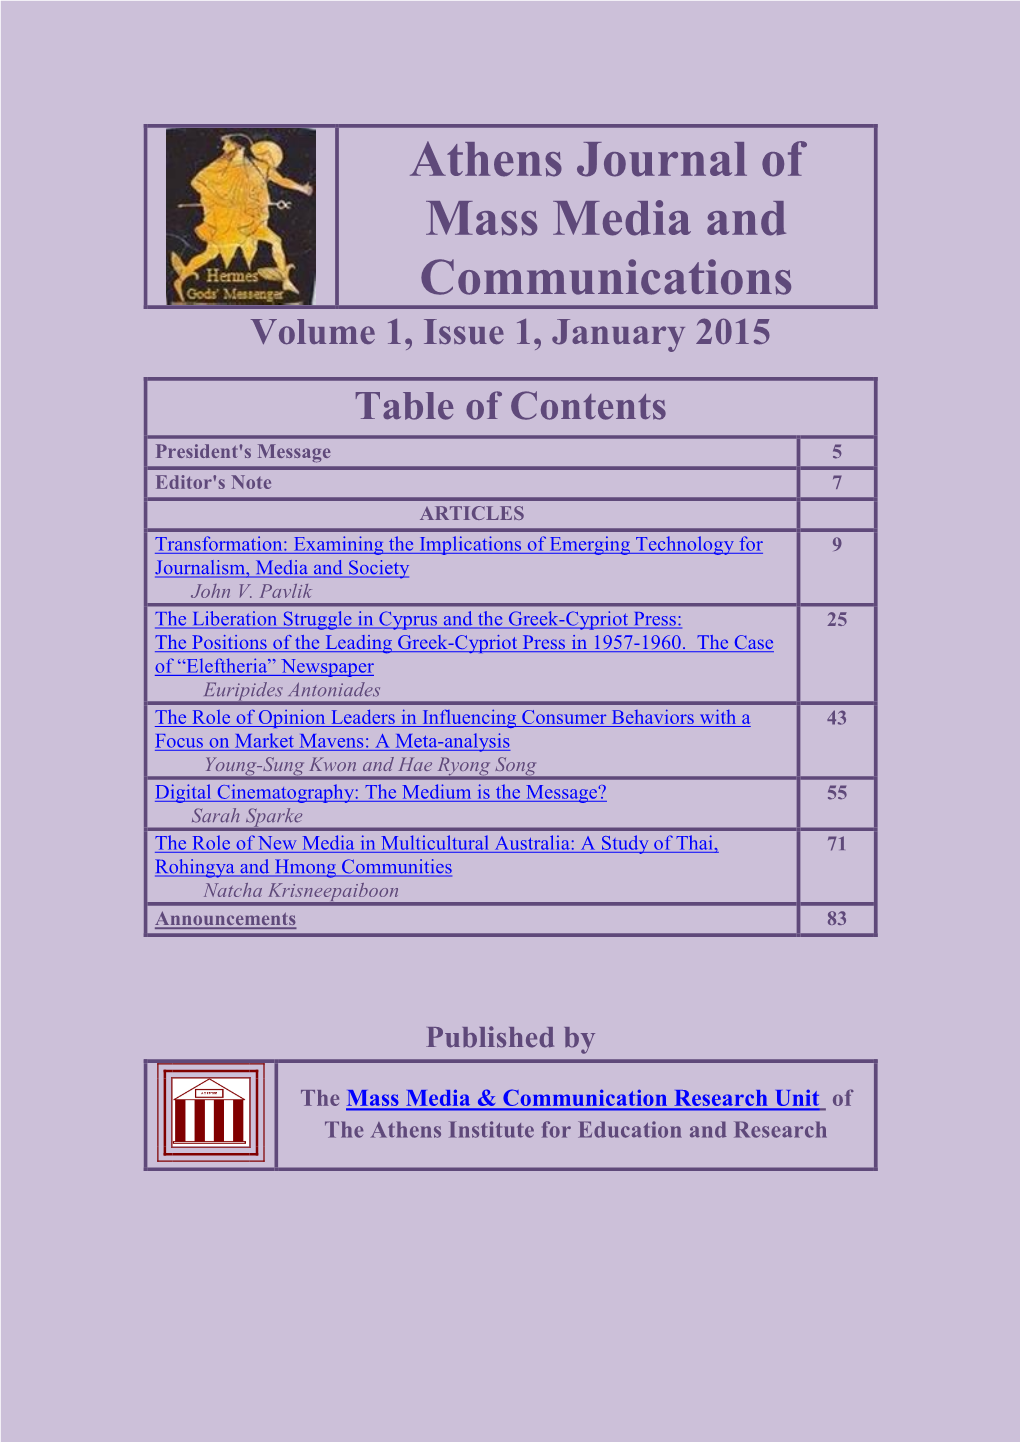 Athens Journal of Mass Media and Communications Volume 1, Issue 1, January 2015